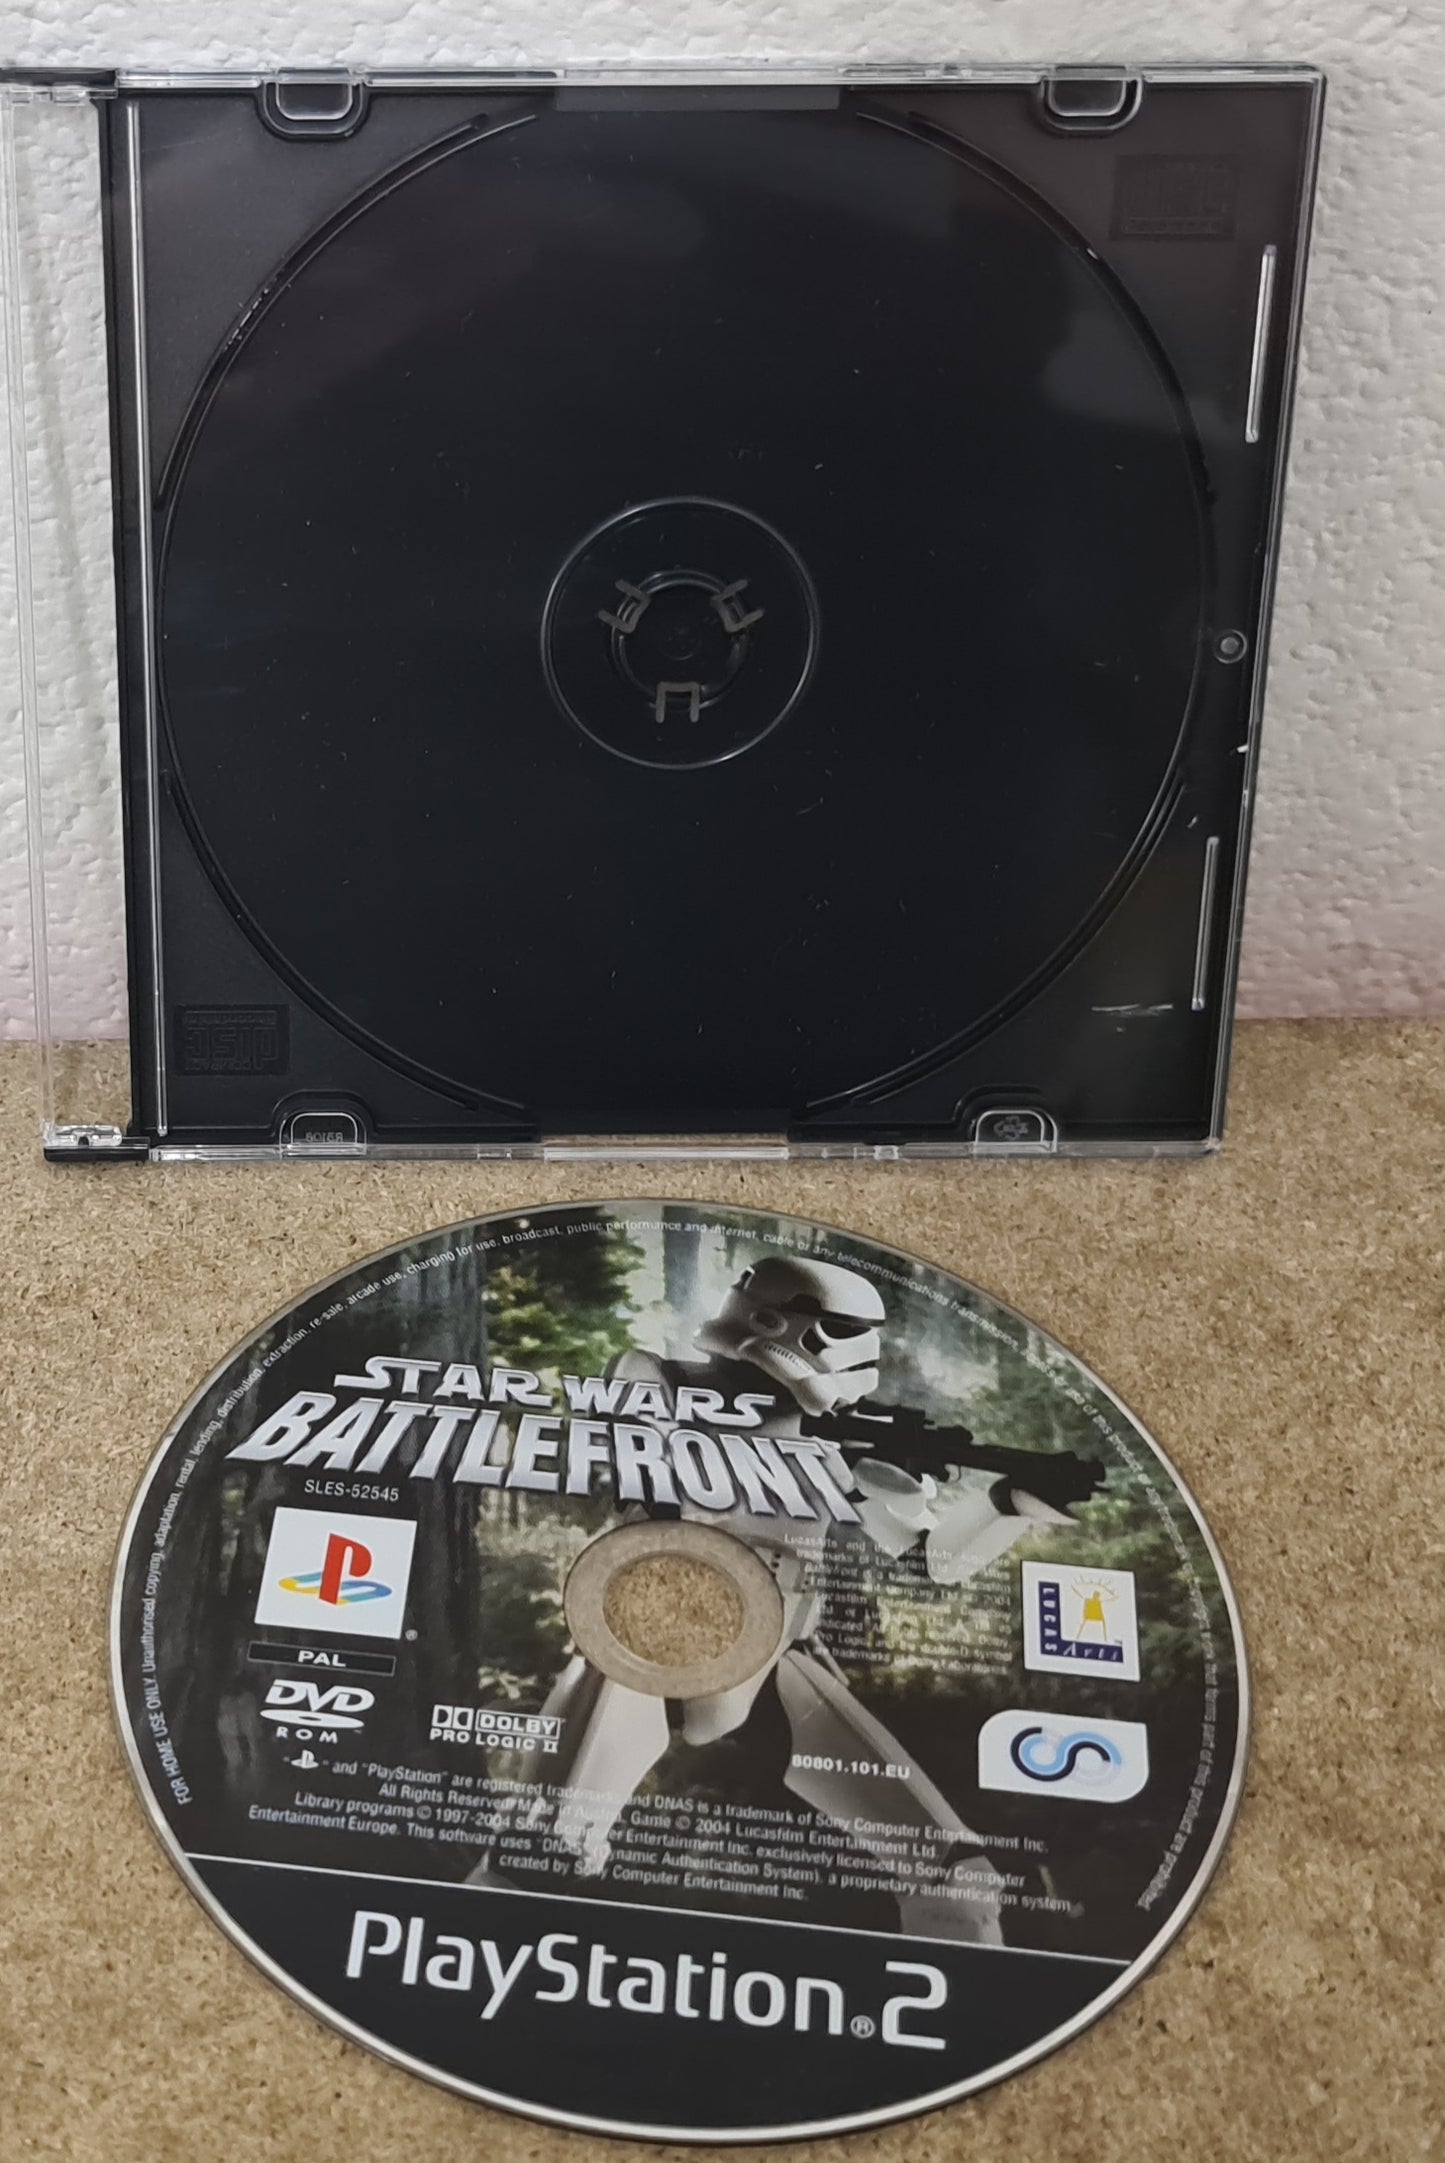 Star Wars Battlefront Sony Playstation 2 (PS2) Game Disc Only